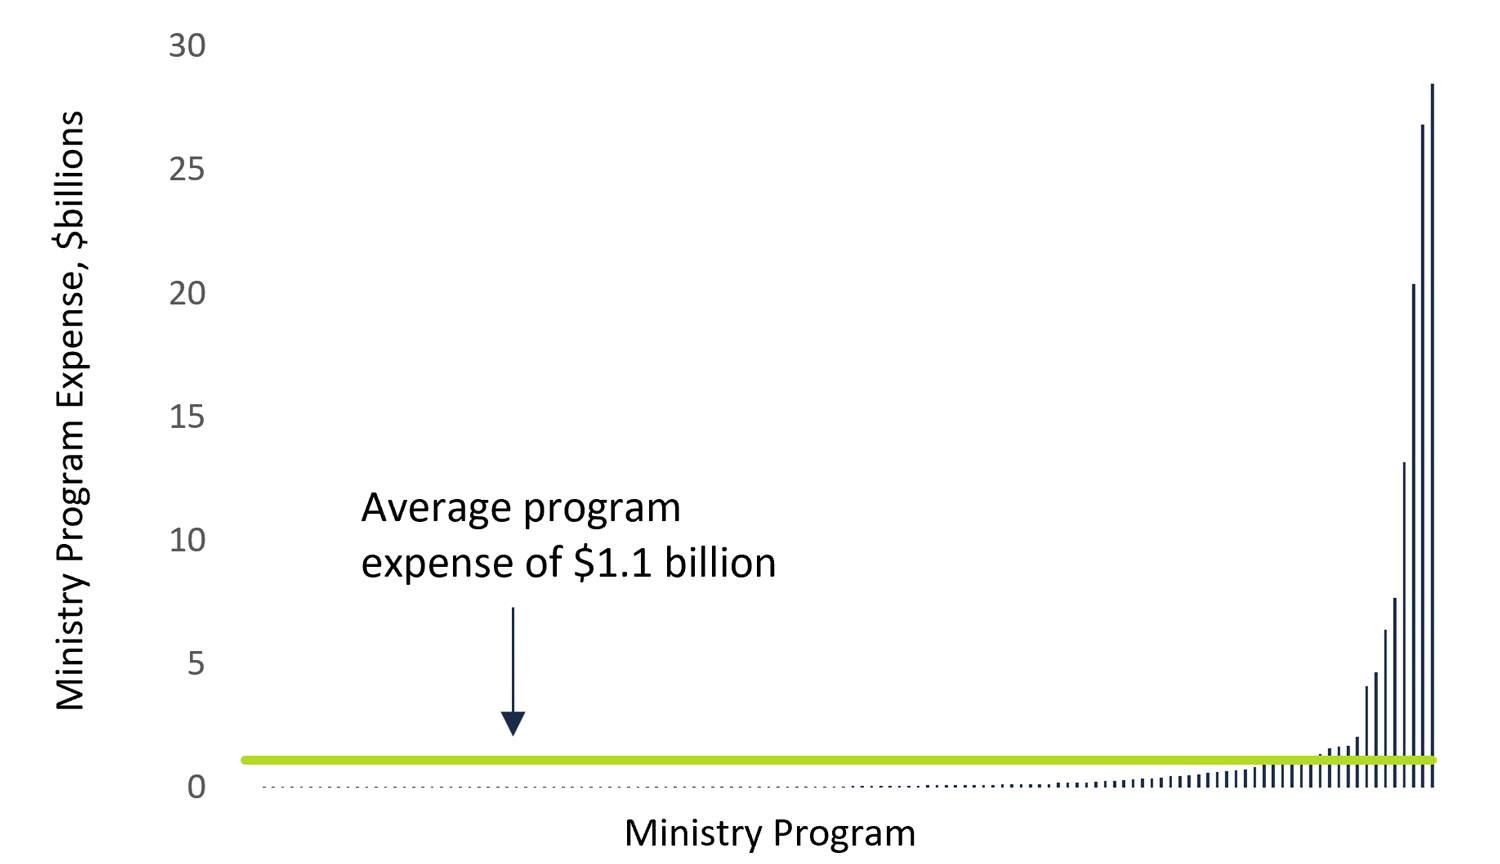 Ministry program expense, ranked from least to most expensive, 2018-19, billions of dollars